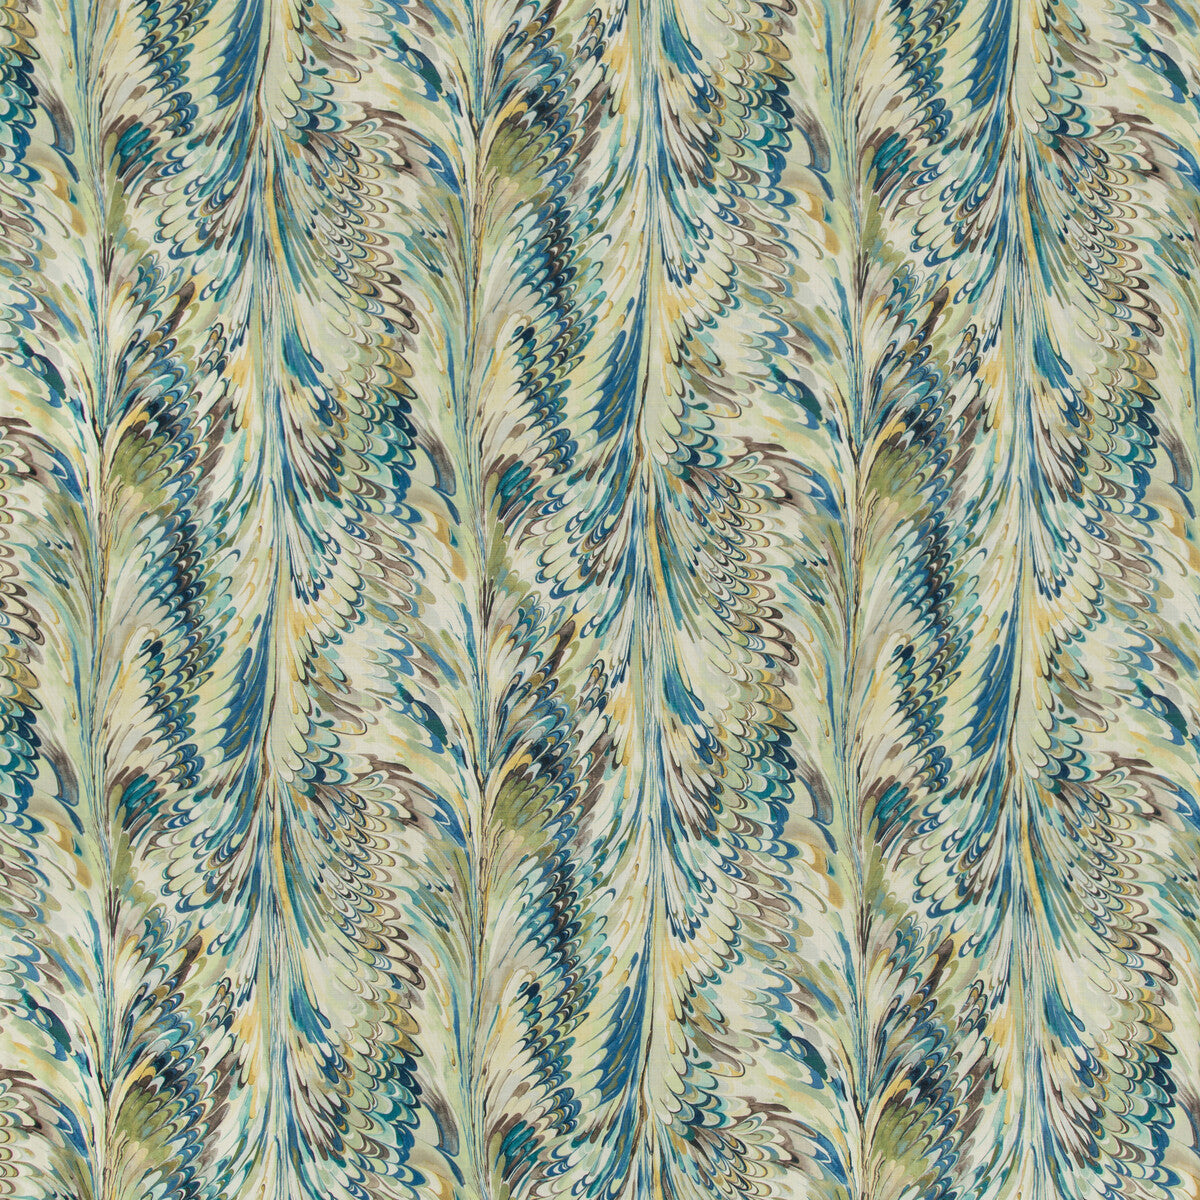 Taplow Print fabric in peacock/gold color - pattern 2019114.345.0 - by Lee Jofa in the Manor House collection